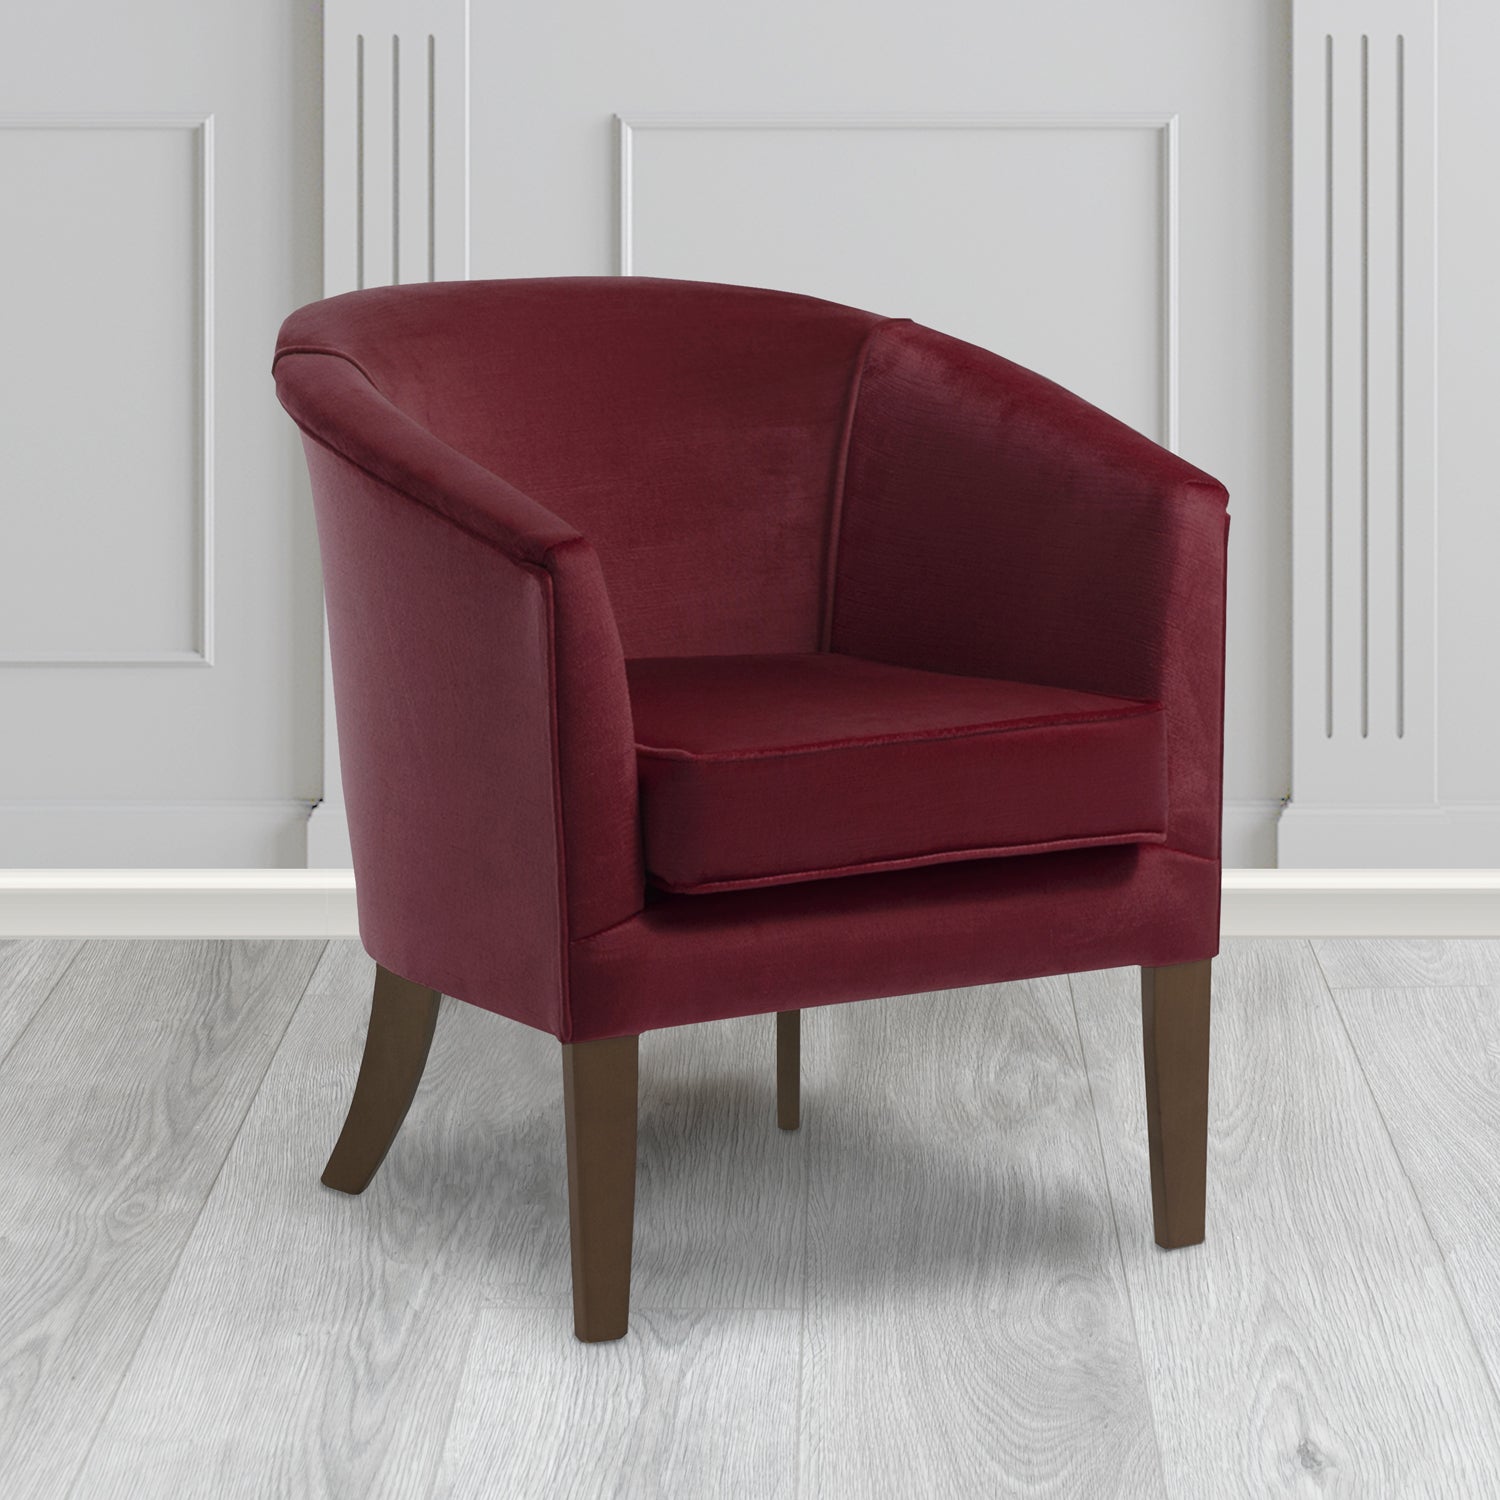 Jazz Tub Chair in Noble 414 Wine Crib 5 Velvet Fabric - Water Resistant - The Tub Chair Shop